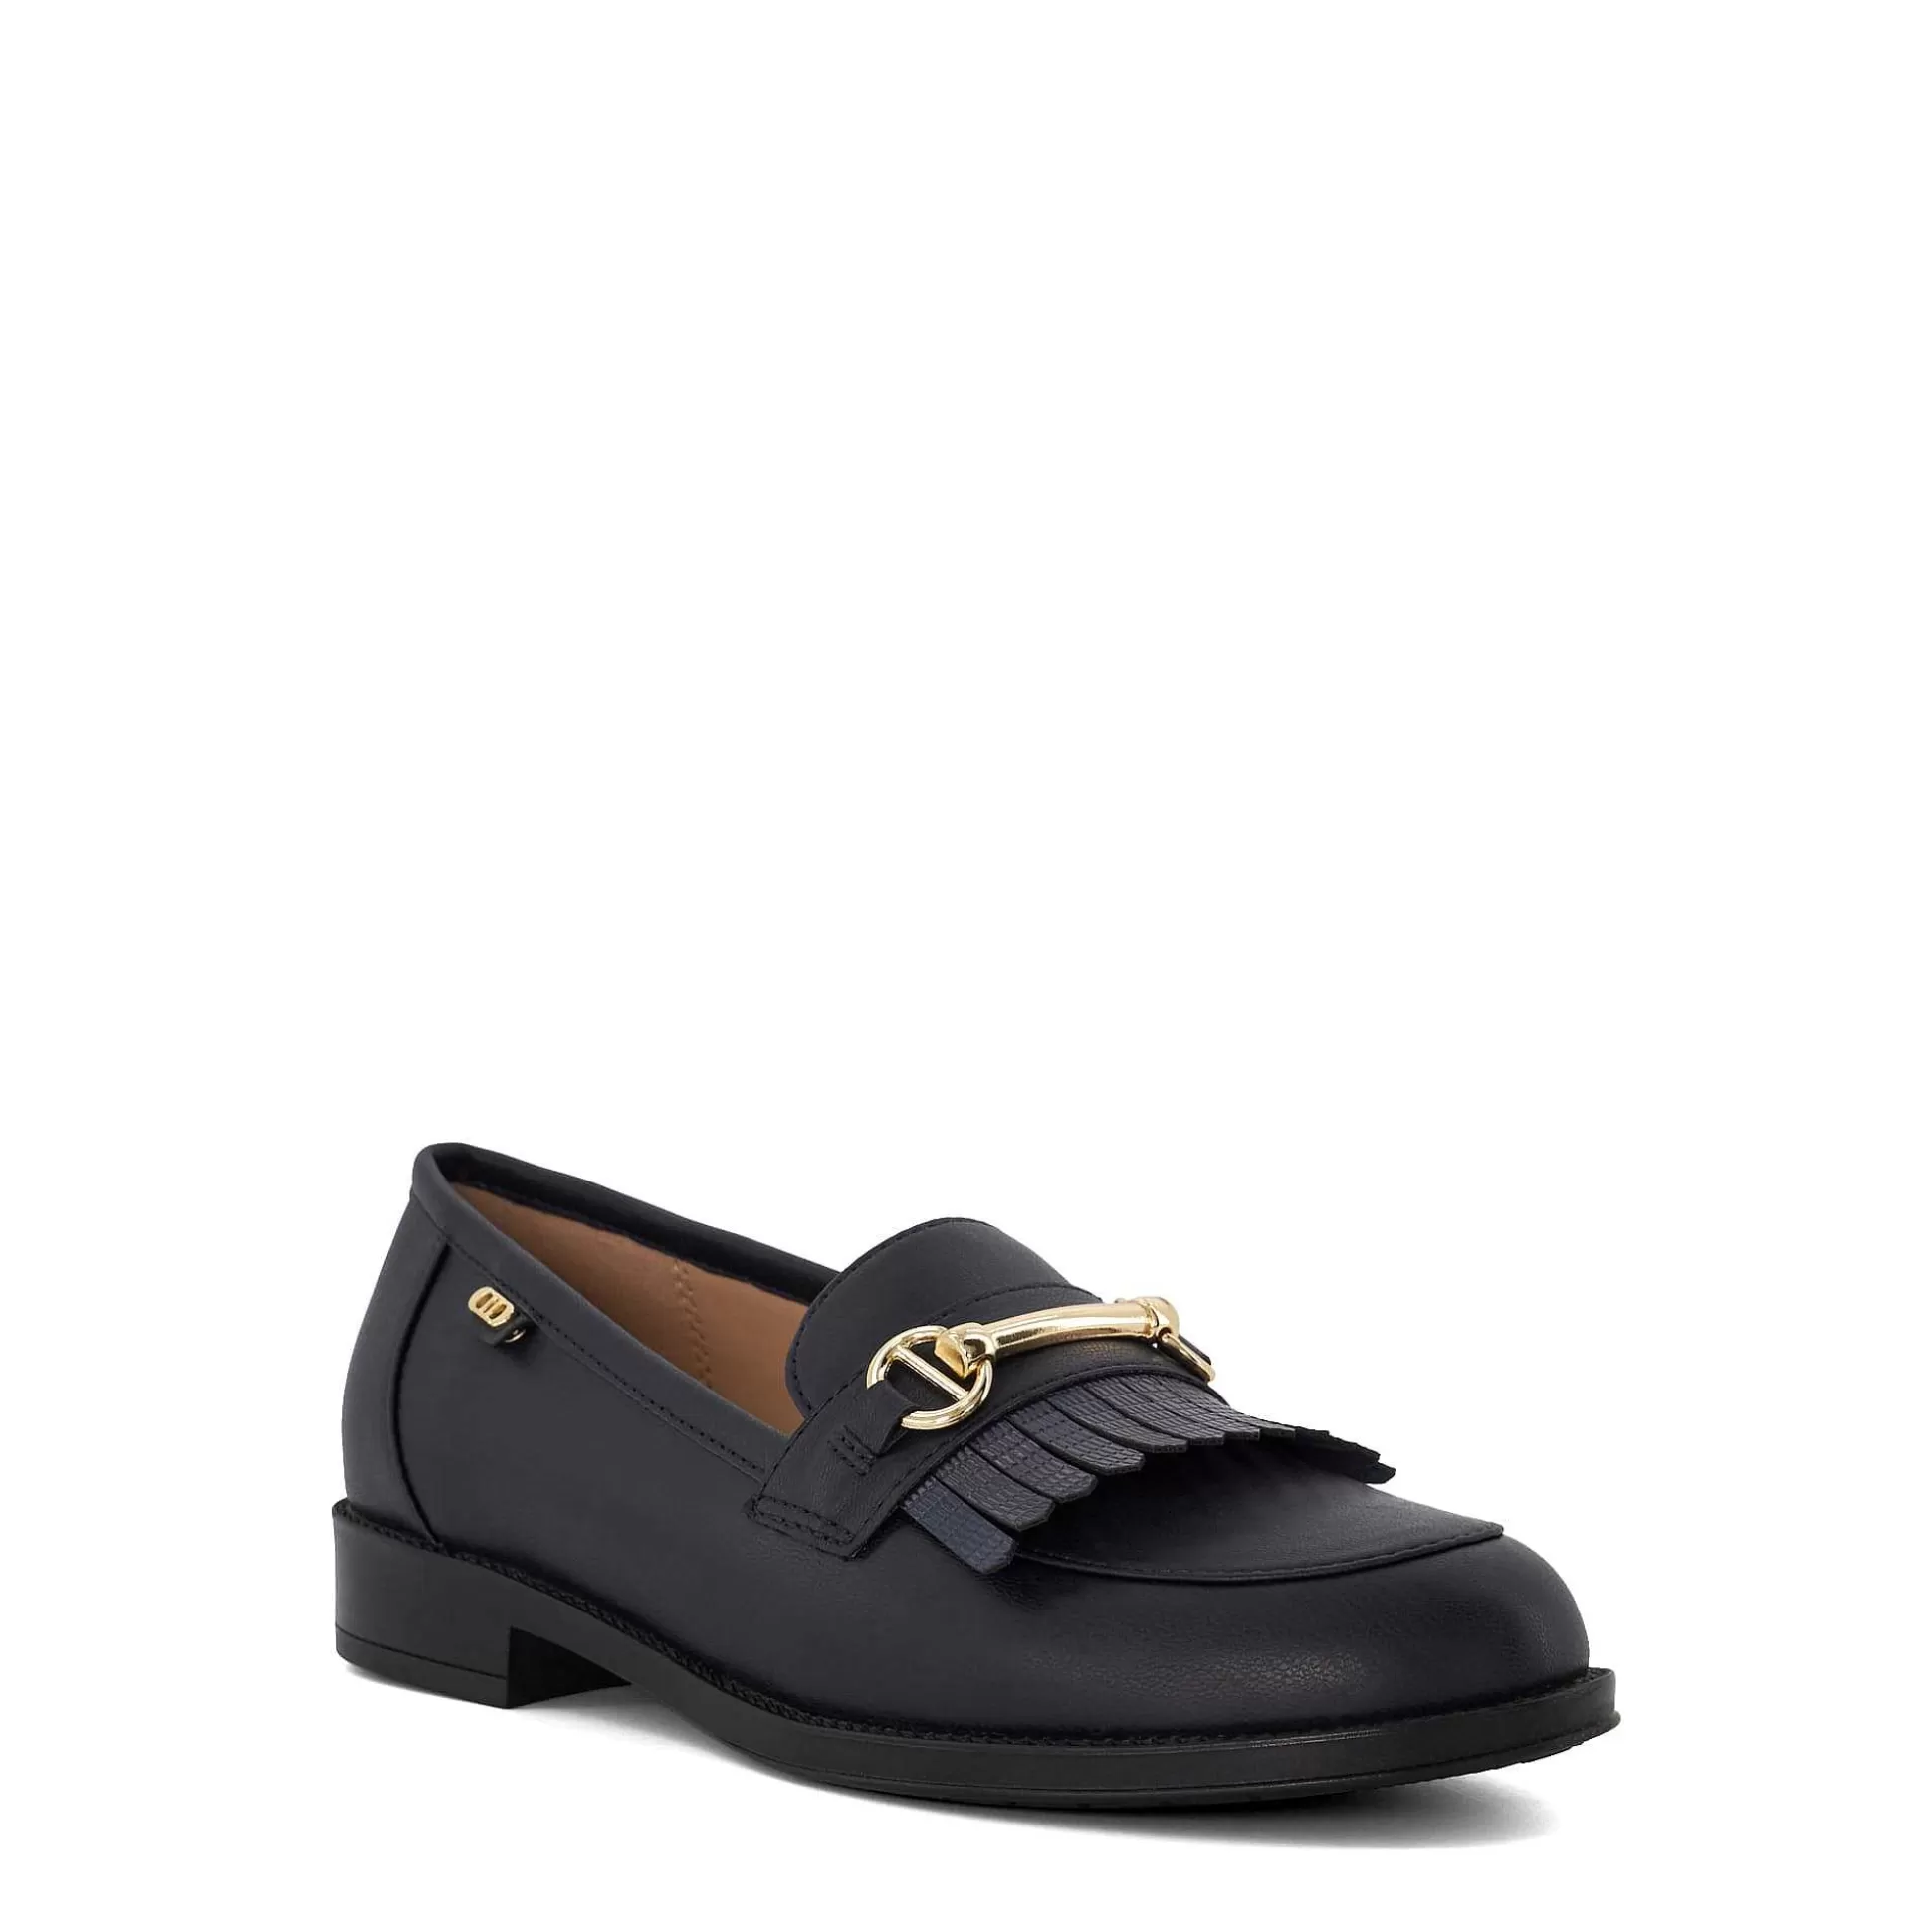 Dune London GESTURE - NAVY-Women Flat Shoes | Loafers